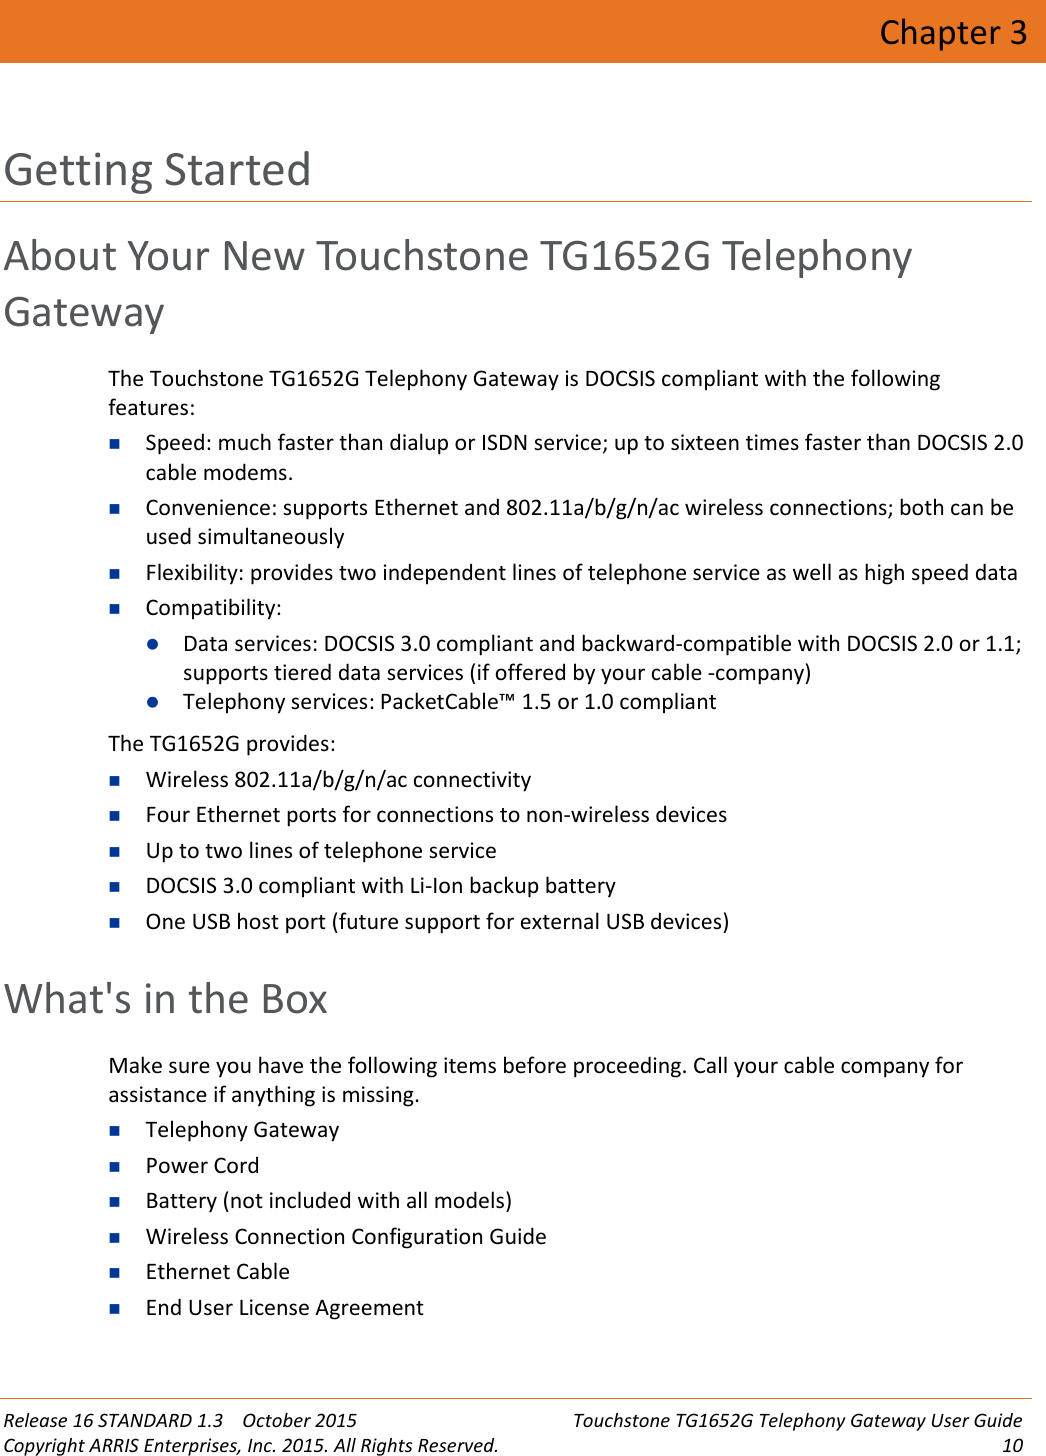 Release 16 STANDARD 1.3 October 2015 Touchstone TG1652G Telephony Gateway User GuideCopyright ARRIS Enterprises, Inc. 2015. All Rights Reserved. 10Chapter 3Getting StartedAbout Your New Touchstone TG1652G TelephonyGatewayThe Touchstone TG1652G Telephony Gateway is DOCSIS compliant with the followingfeatures:Speed: much faster than dialup or ISDN service; up to sixteen times faster than DOCSIS 2.0cable modems.Convenience: supports Ethernet and 802.11a/b/g/n/ac wireless connections; both can beused simultaneouslyFlexibility: provides two independent lines of telephone service as well as high speed dataCompatibility:Data services: DOCSIS 3.0 compliant and backward-compatible with DOCSIS 2.0 or 1.1;supports tiered data services (if offered by your cable -company)Telephony services: PacketCable™ 1.5 or 1.0 compliant The TG1652G provides:Wireless 802.11a/b/g/n/ac connectivityFour Ethernet ports for connections to non-wireless devicesUp to two lines of telephone serviceDOCSIS 3.0 compliant with Li-Ion backup batteryOne USB host port (future support for external USB devices)What&apos;s in the BoxMake sure you have the following items before proceeding. Call your cable company forassistance if anything is missing.Telephony GatewayPower CordBattery (not included with all models)Wireless Connection Configuration GuideEthernet CableEnd User License Agreement